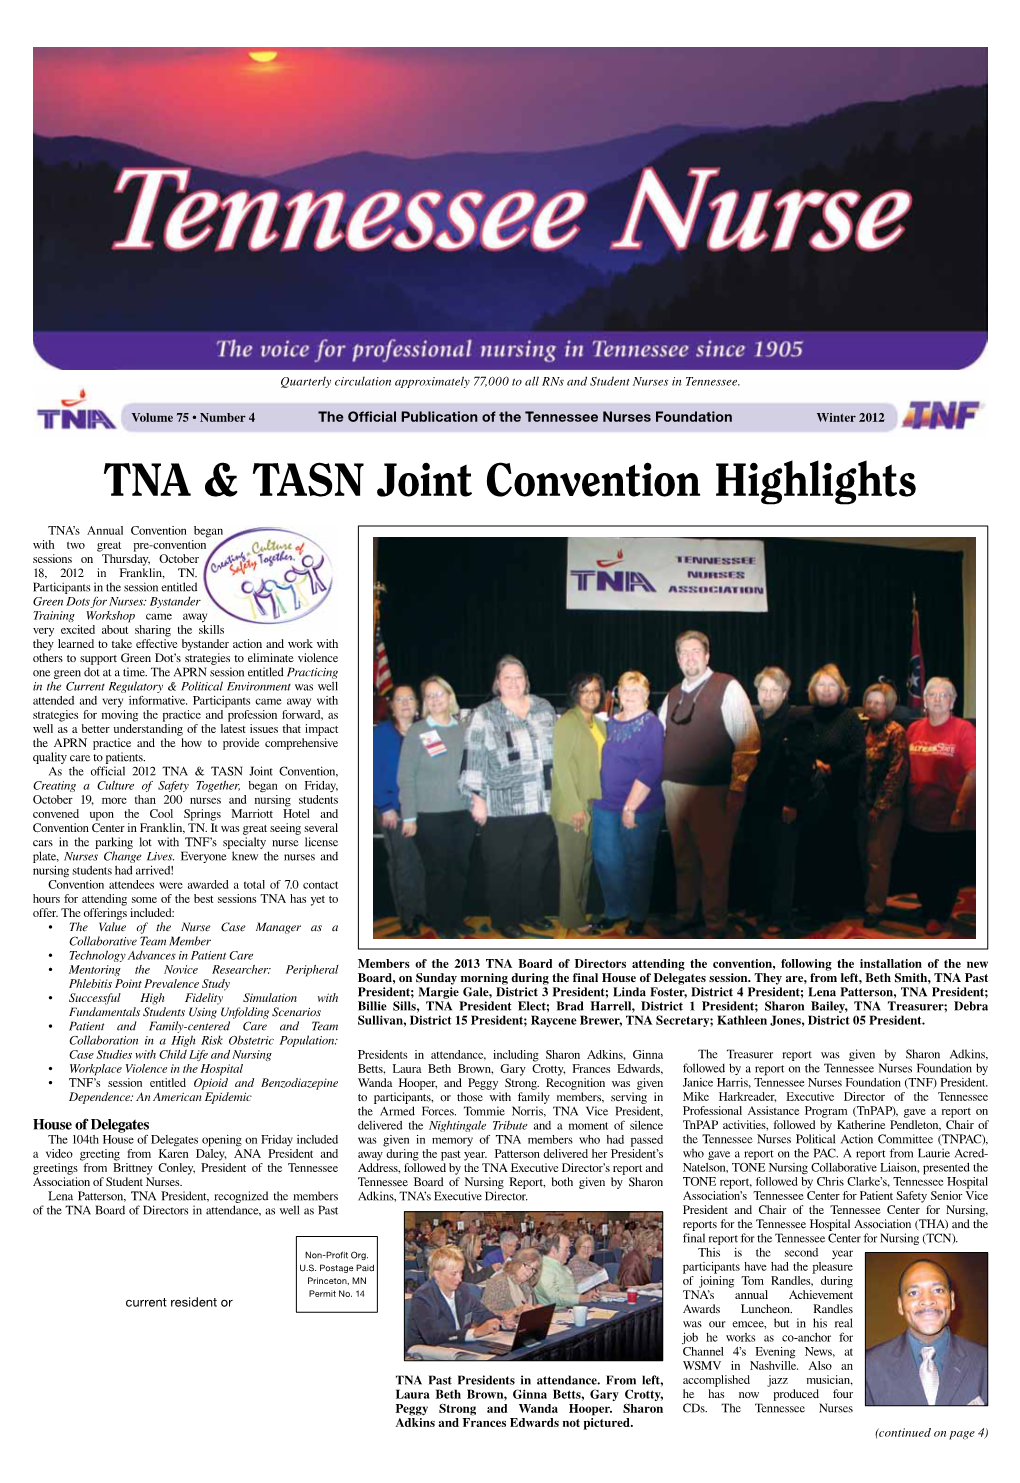 TNA & TASN Joint Convention Highlights